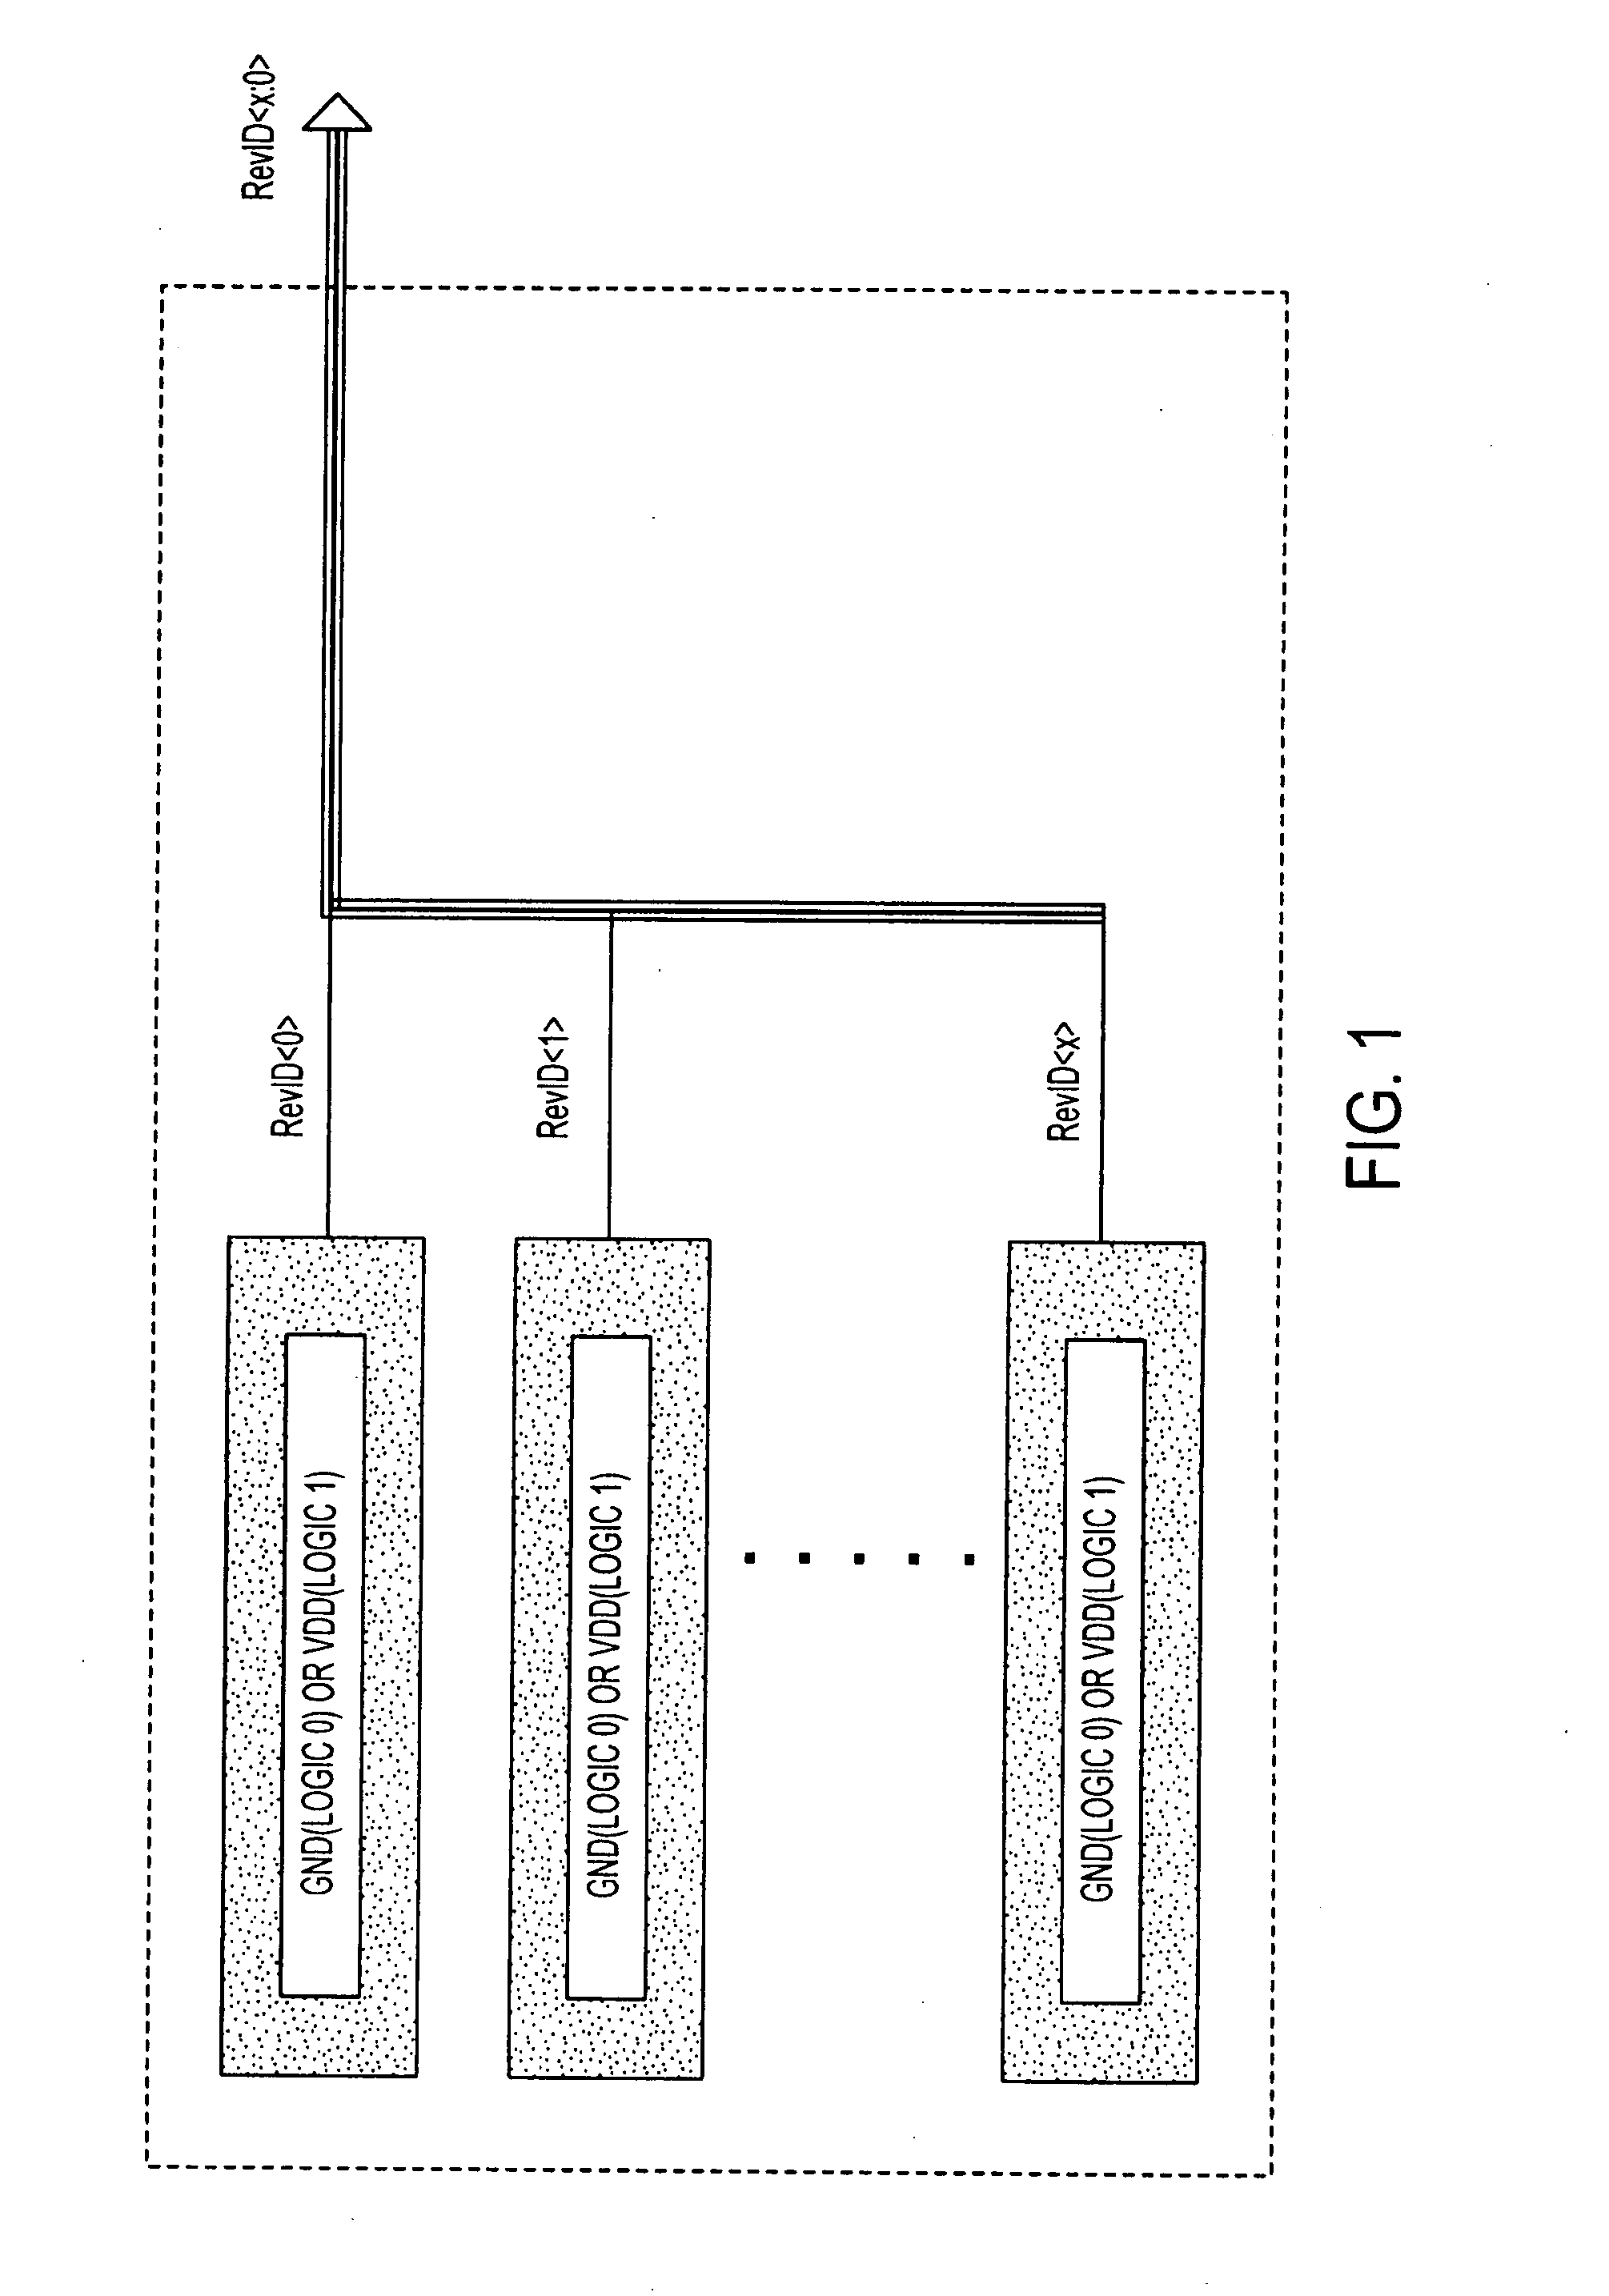 Programmable memory cell in an integrated circuit chip